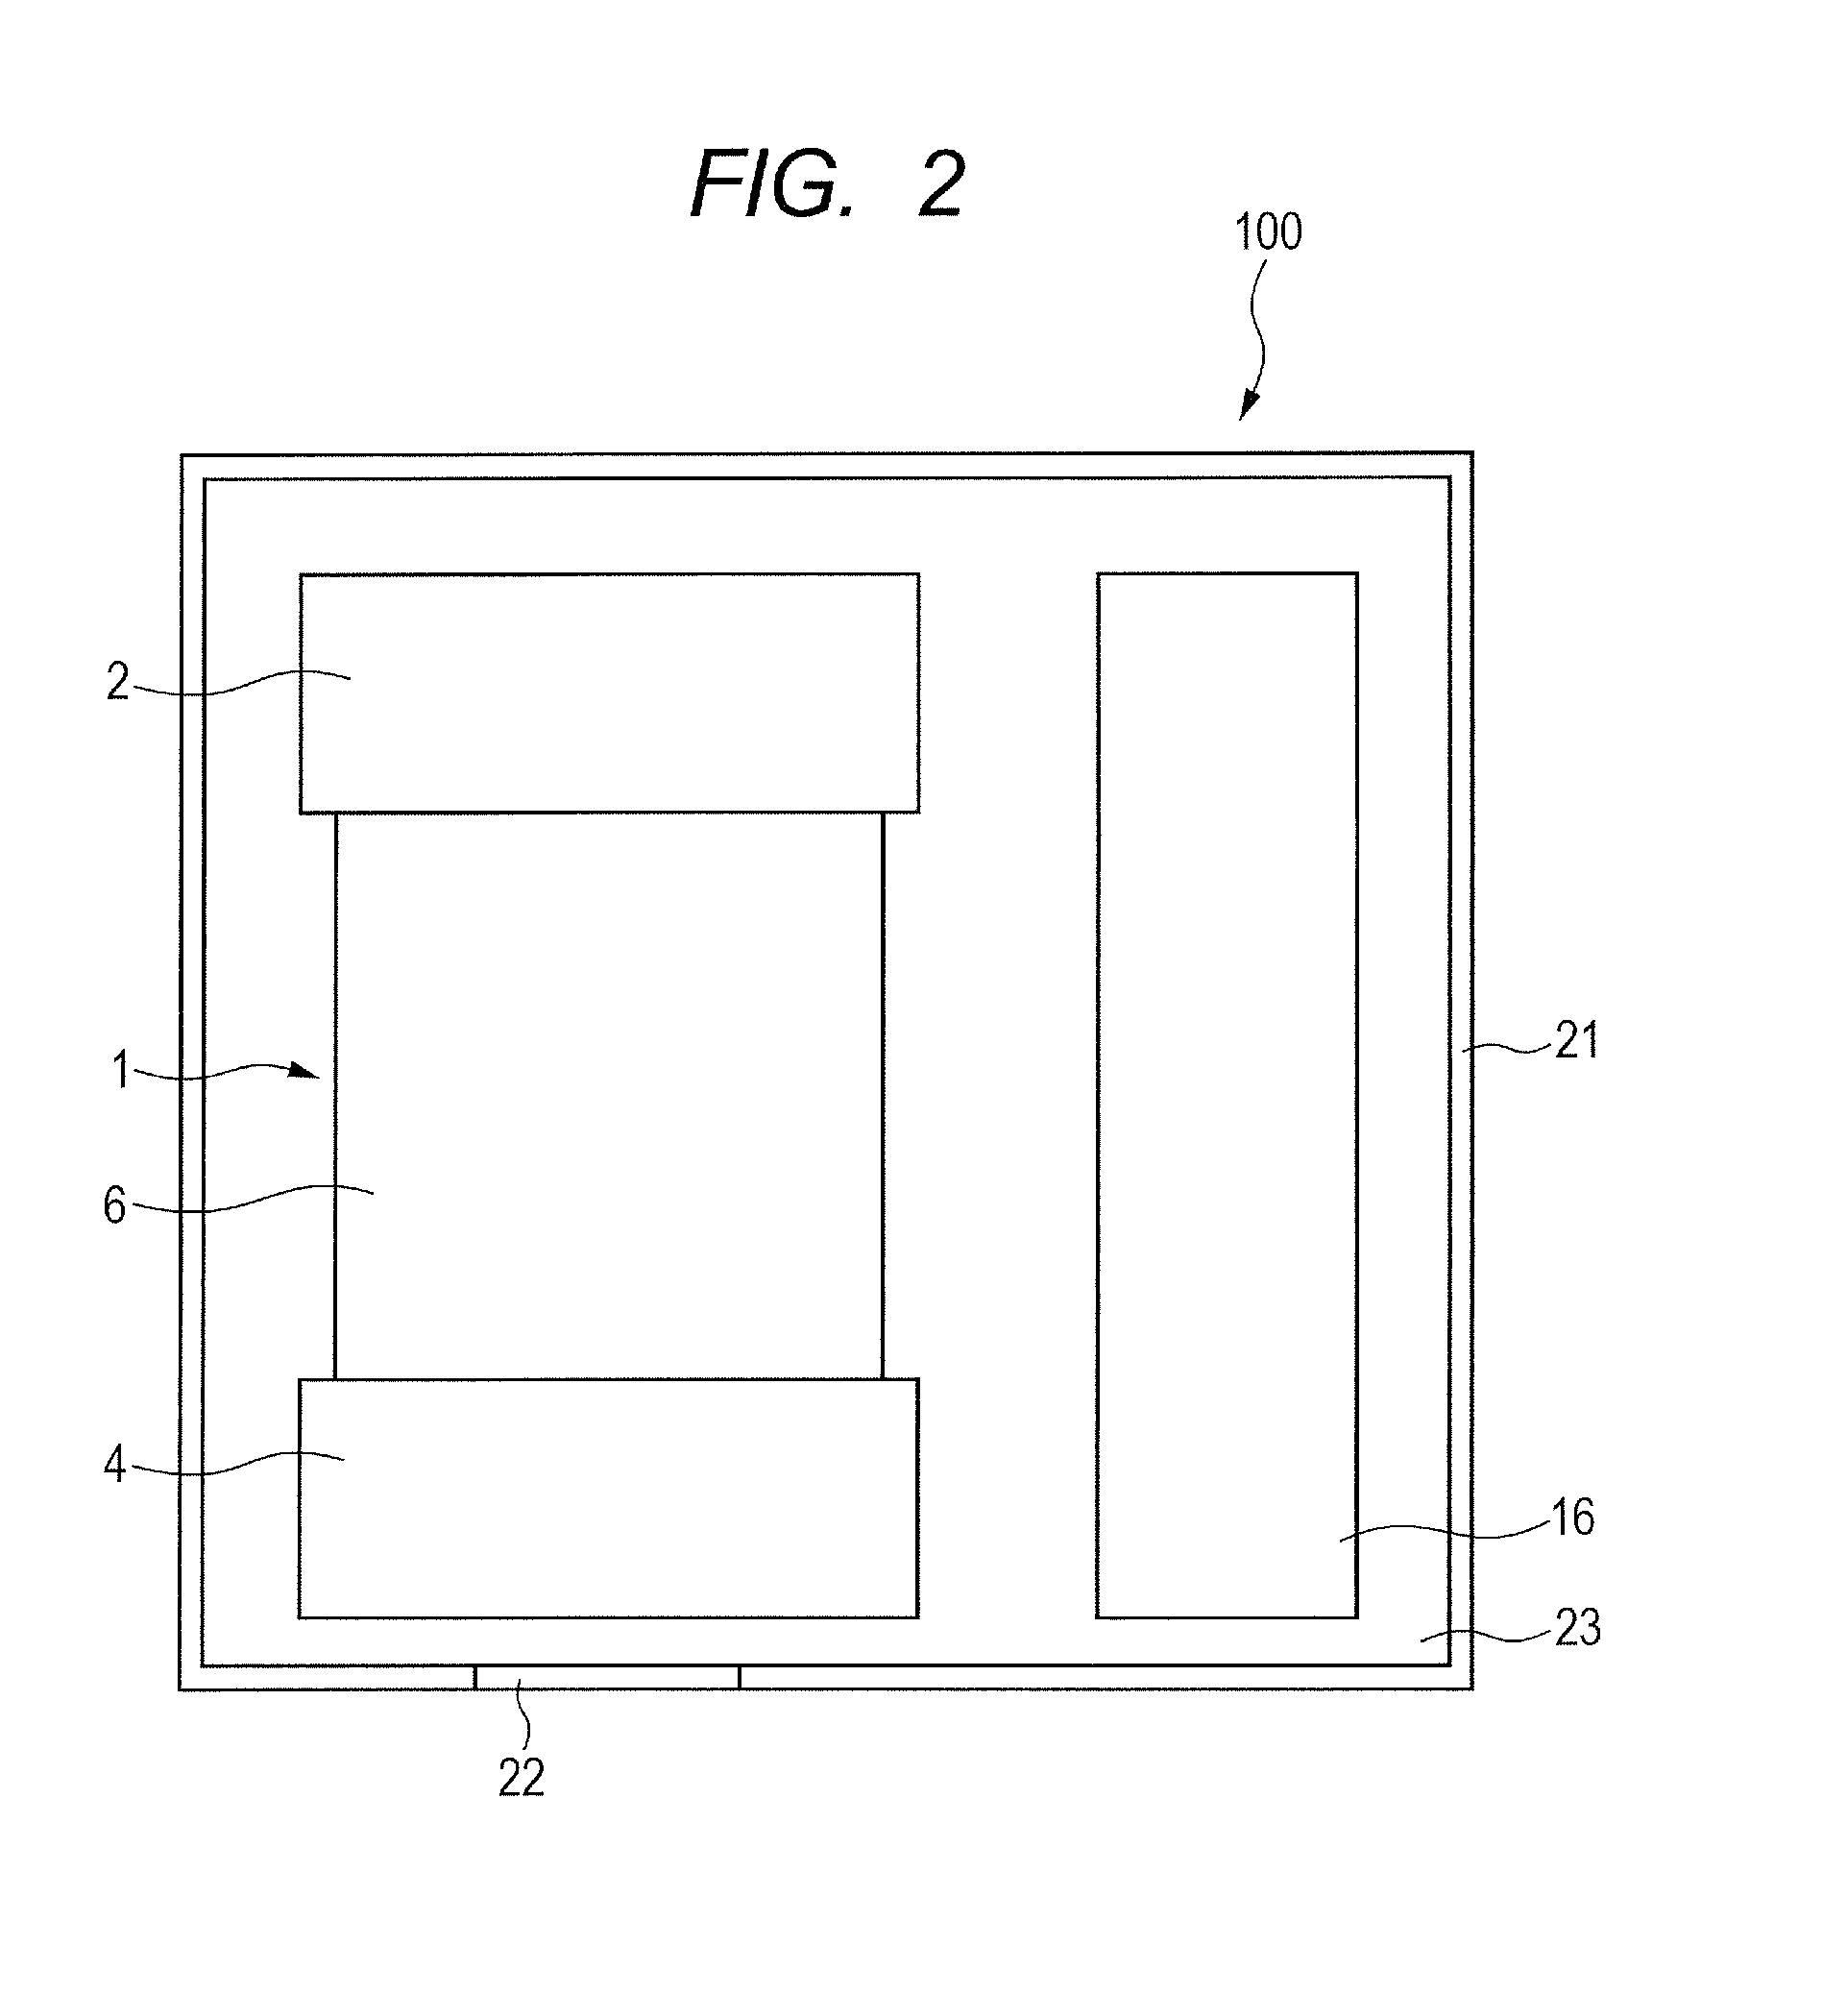 X-ray generating tube, x-ray generating apparatus and x-ray imaging system using the same